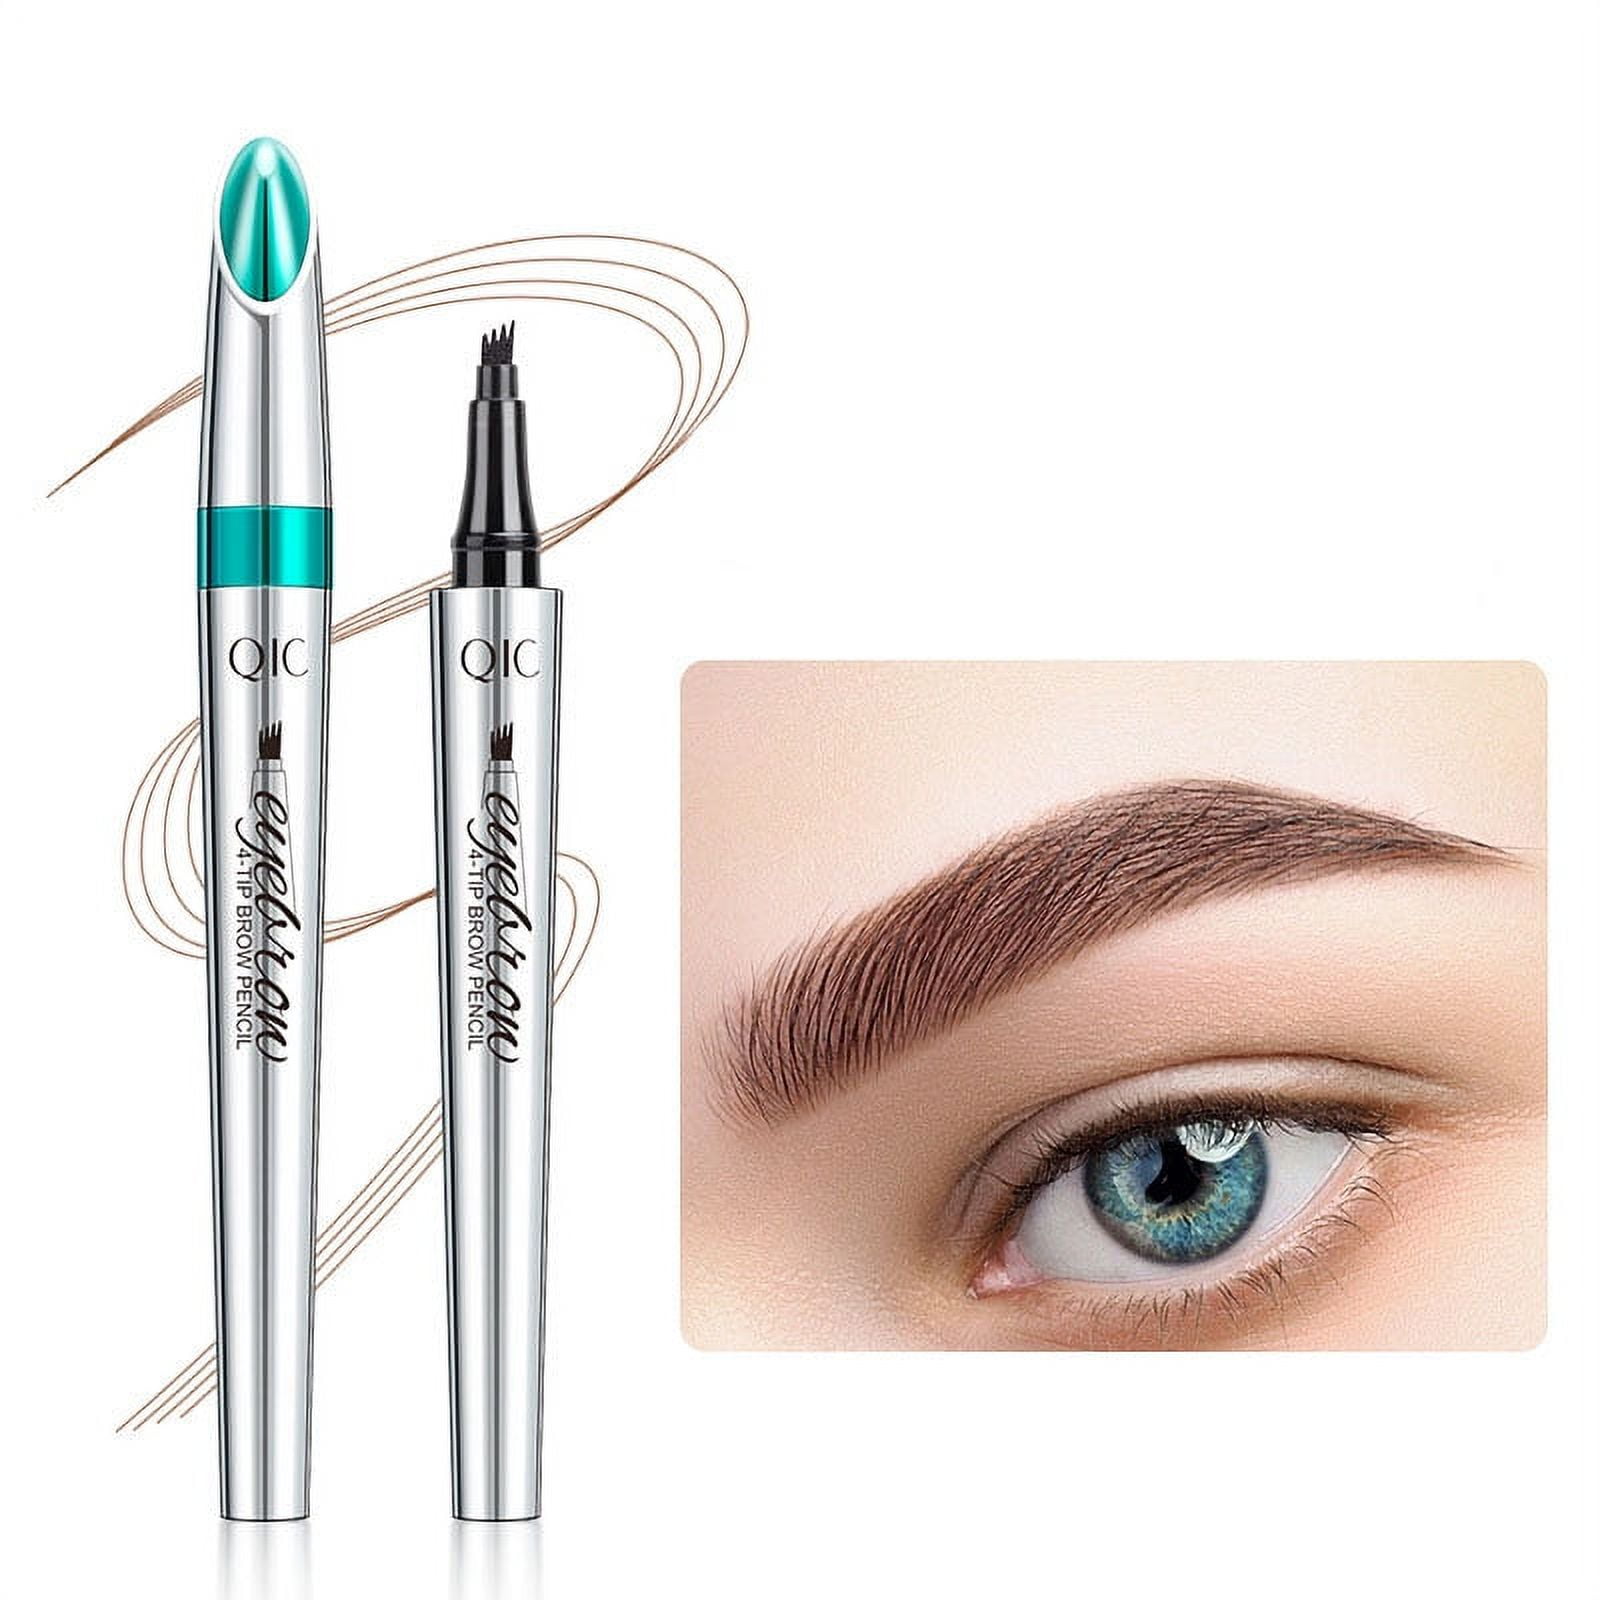 WECENT 4 Tipped Precise Brow Pen - Smudge-proof and Waterproof Eyebrow Pen  with 4 Point Pencil for Natural-looking Eyebrows-Light Brown 